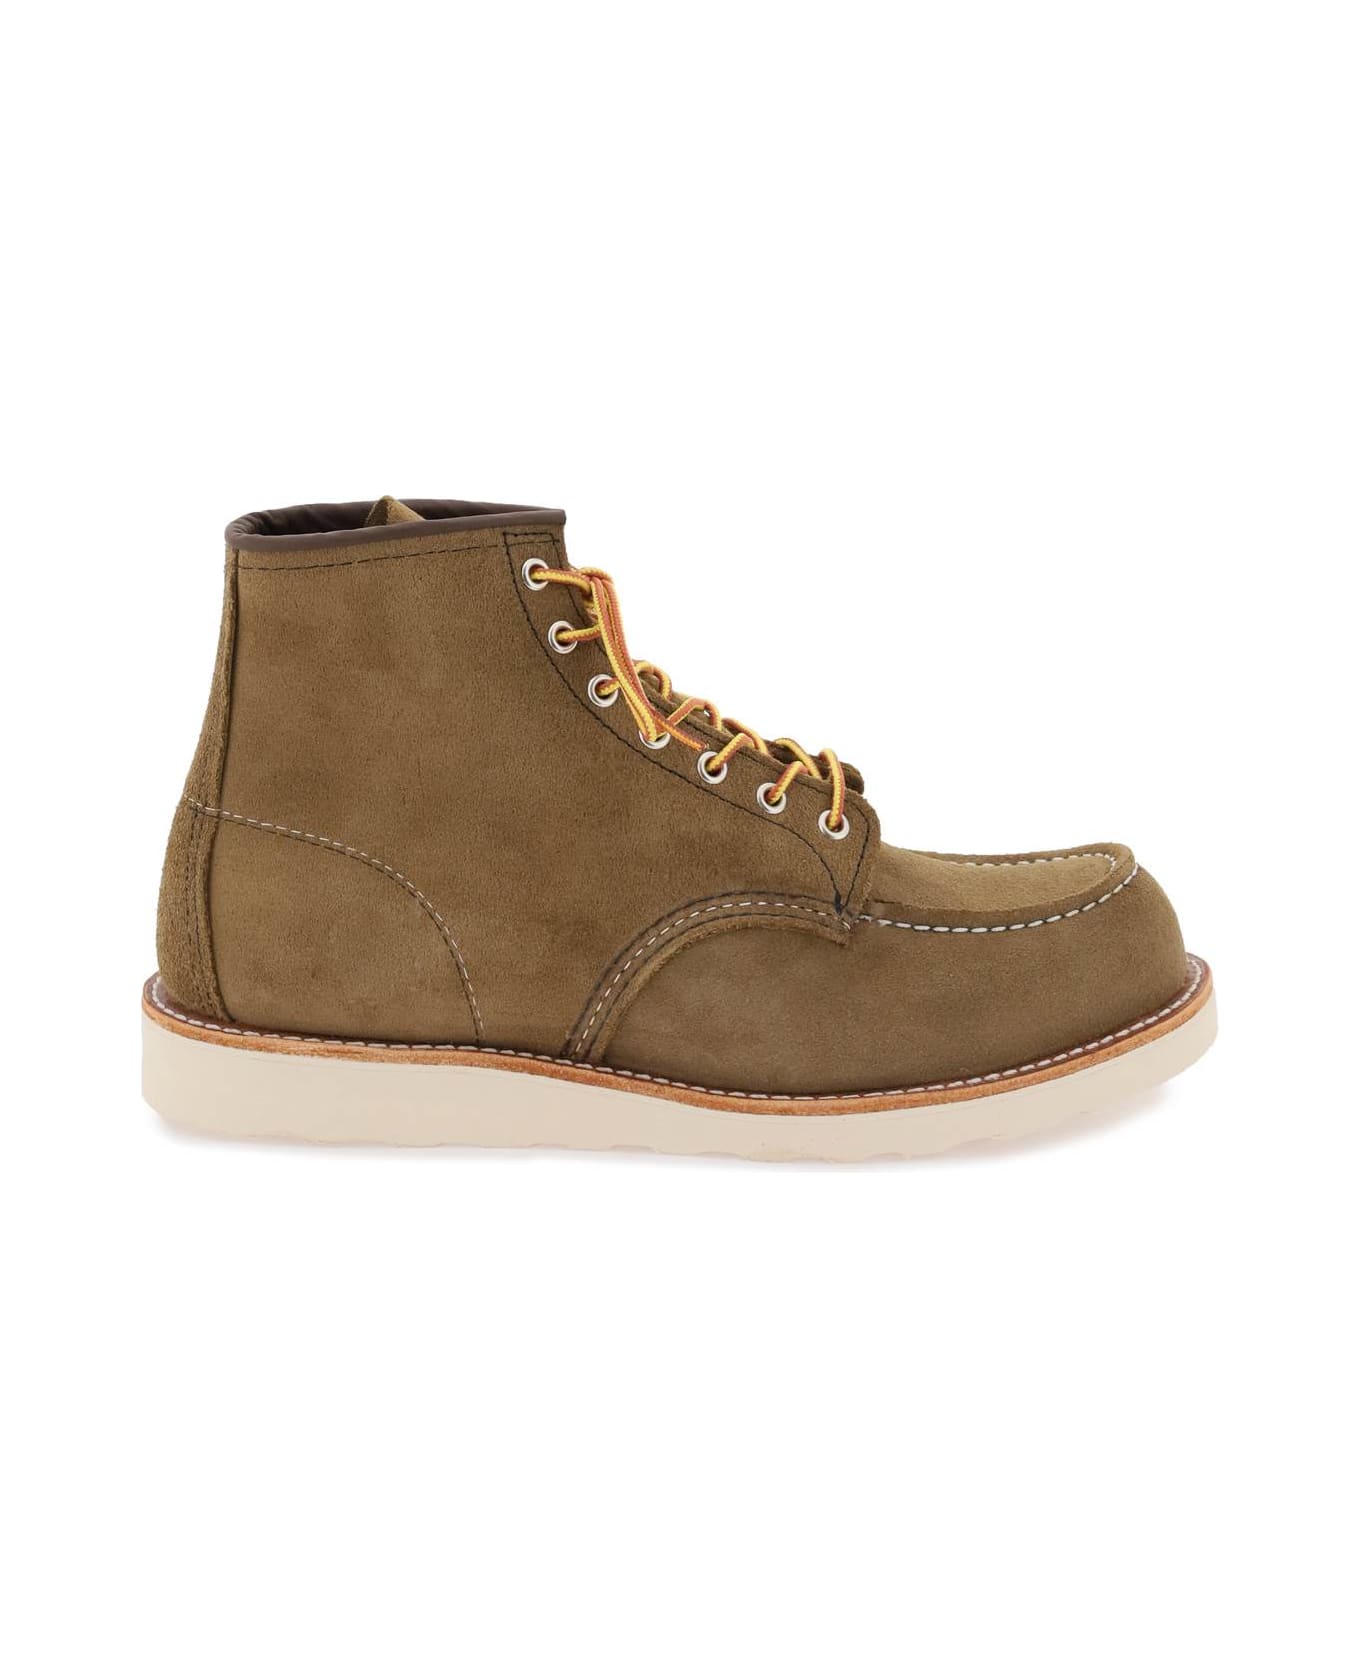 Red Wing Classic Moc Ankle Boots - OLIVE MOHAVE (Khaki) ブーツ